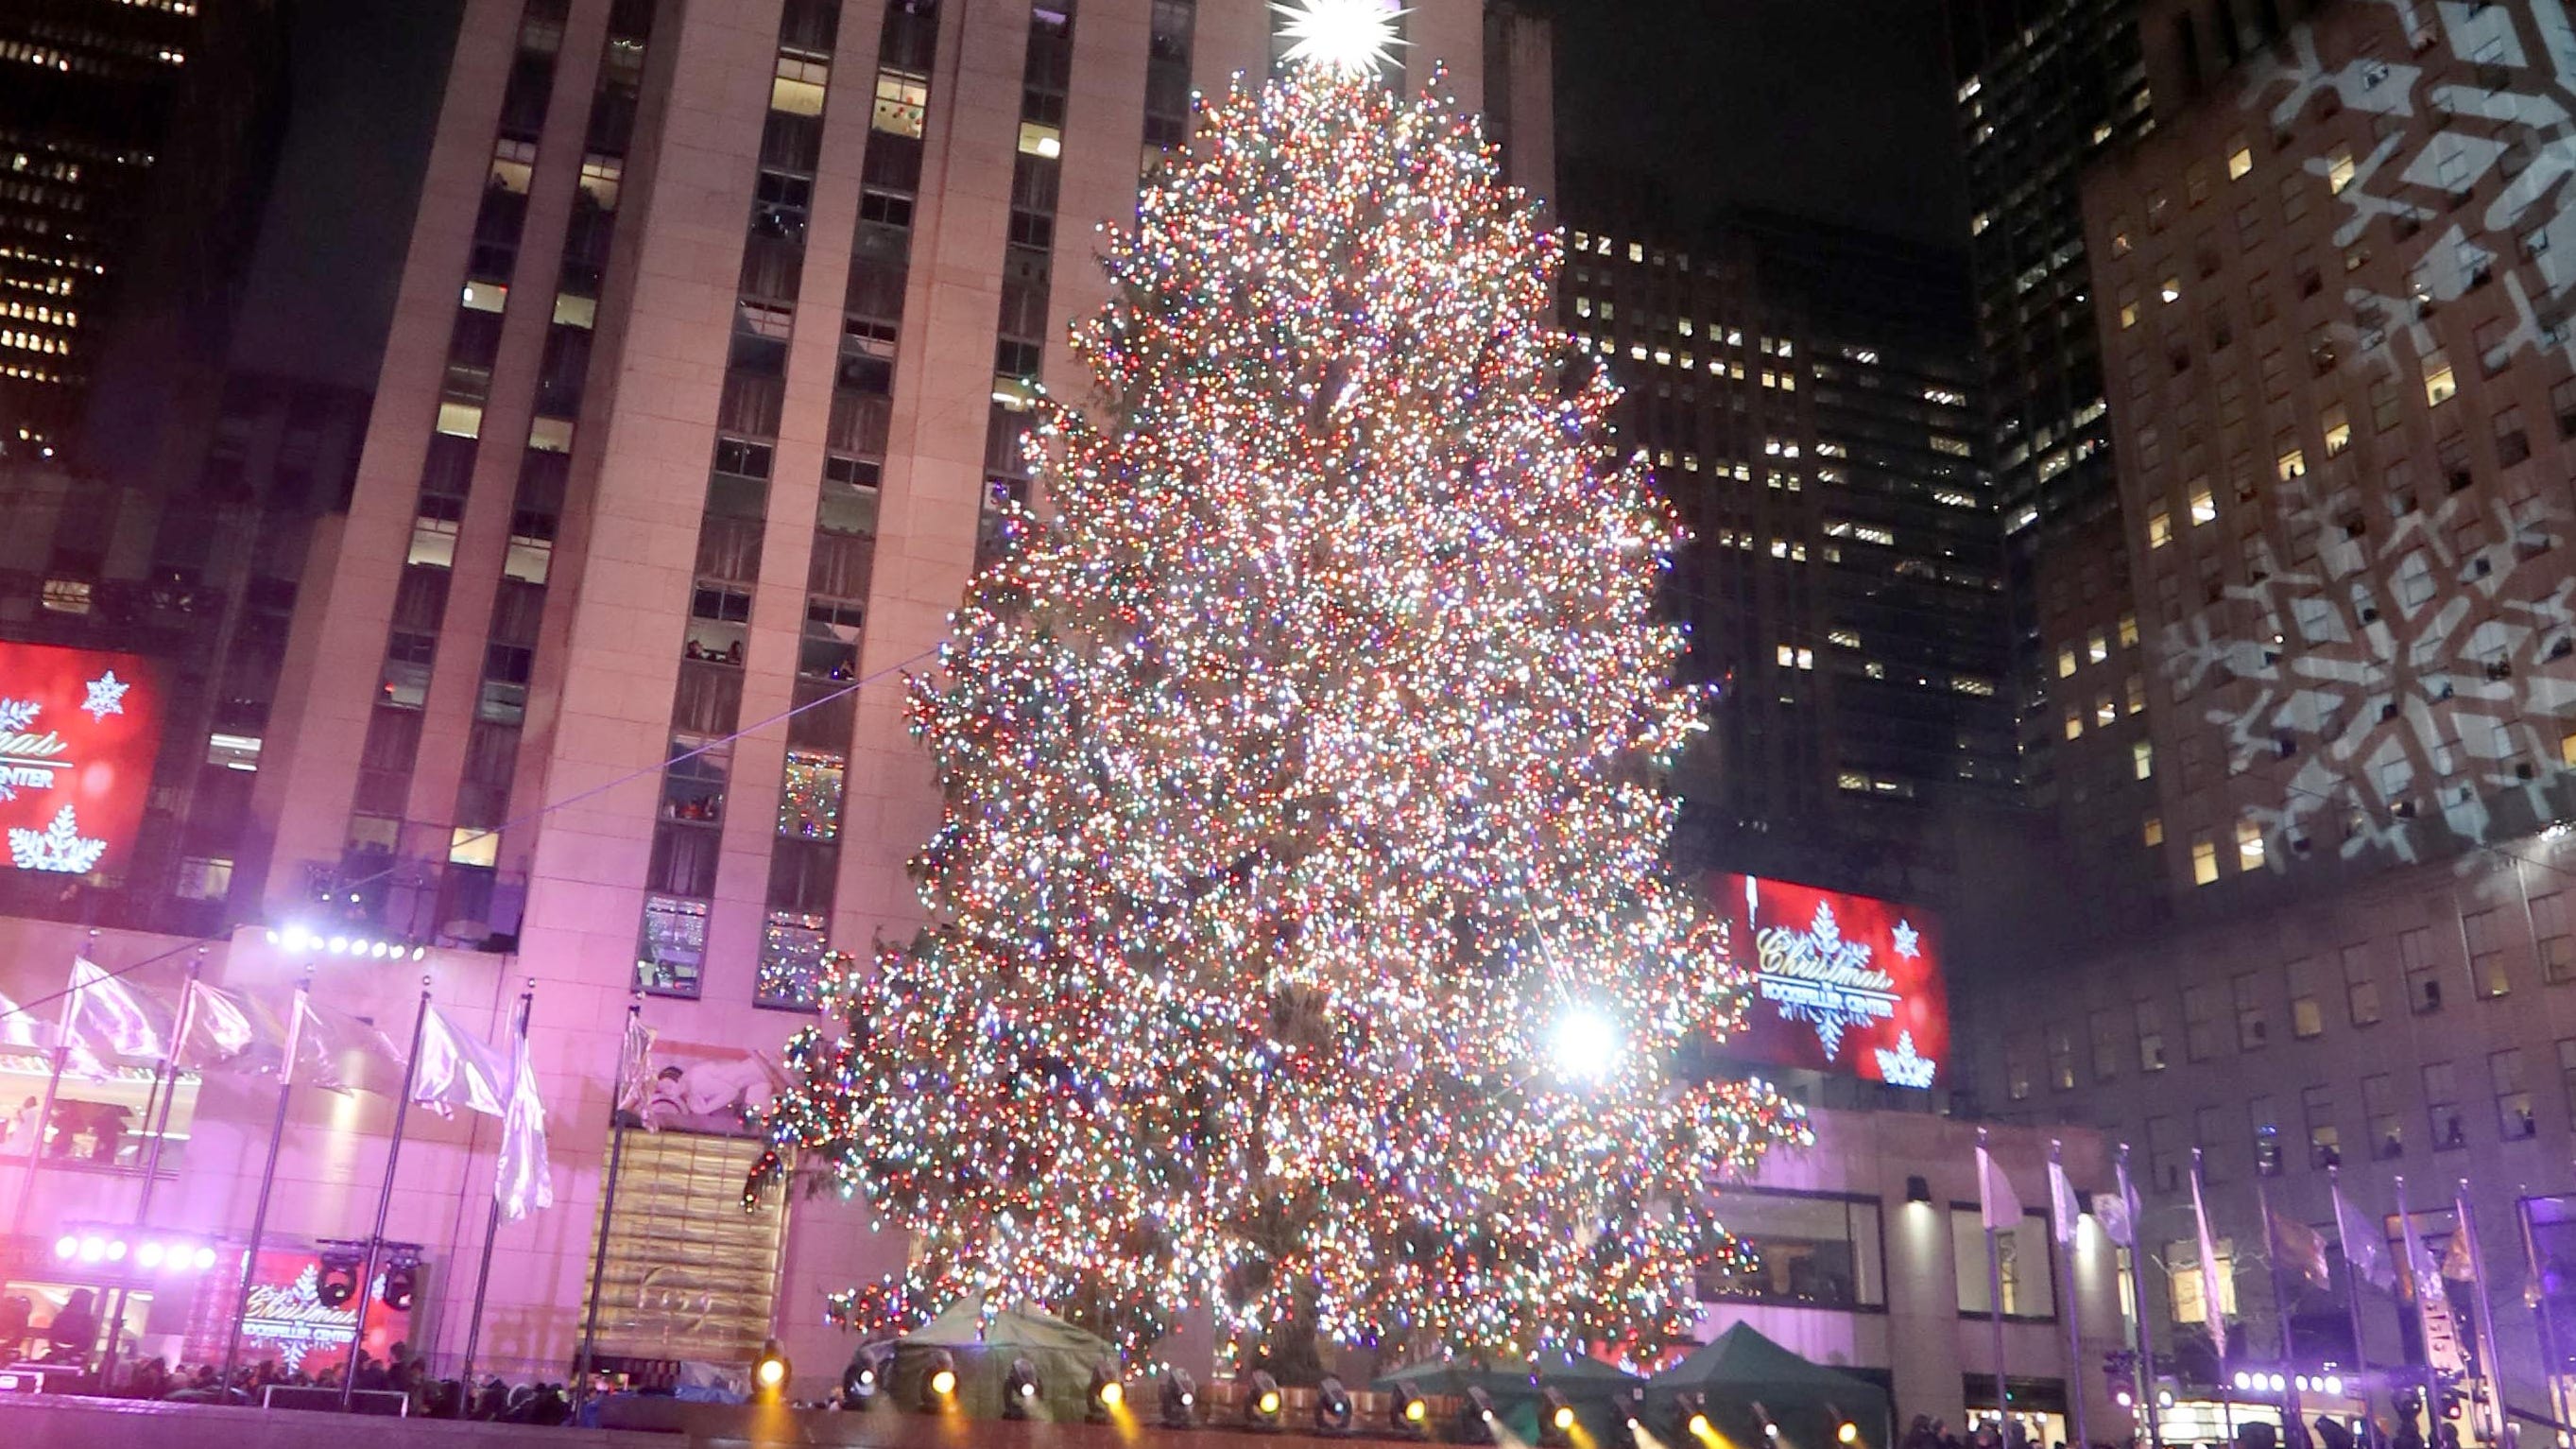 Rockefeller Center Christmas tree 2021 Fun facts, when will it be lit